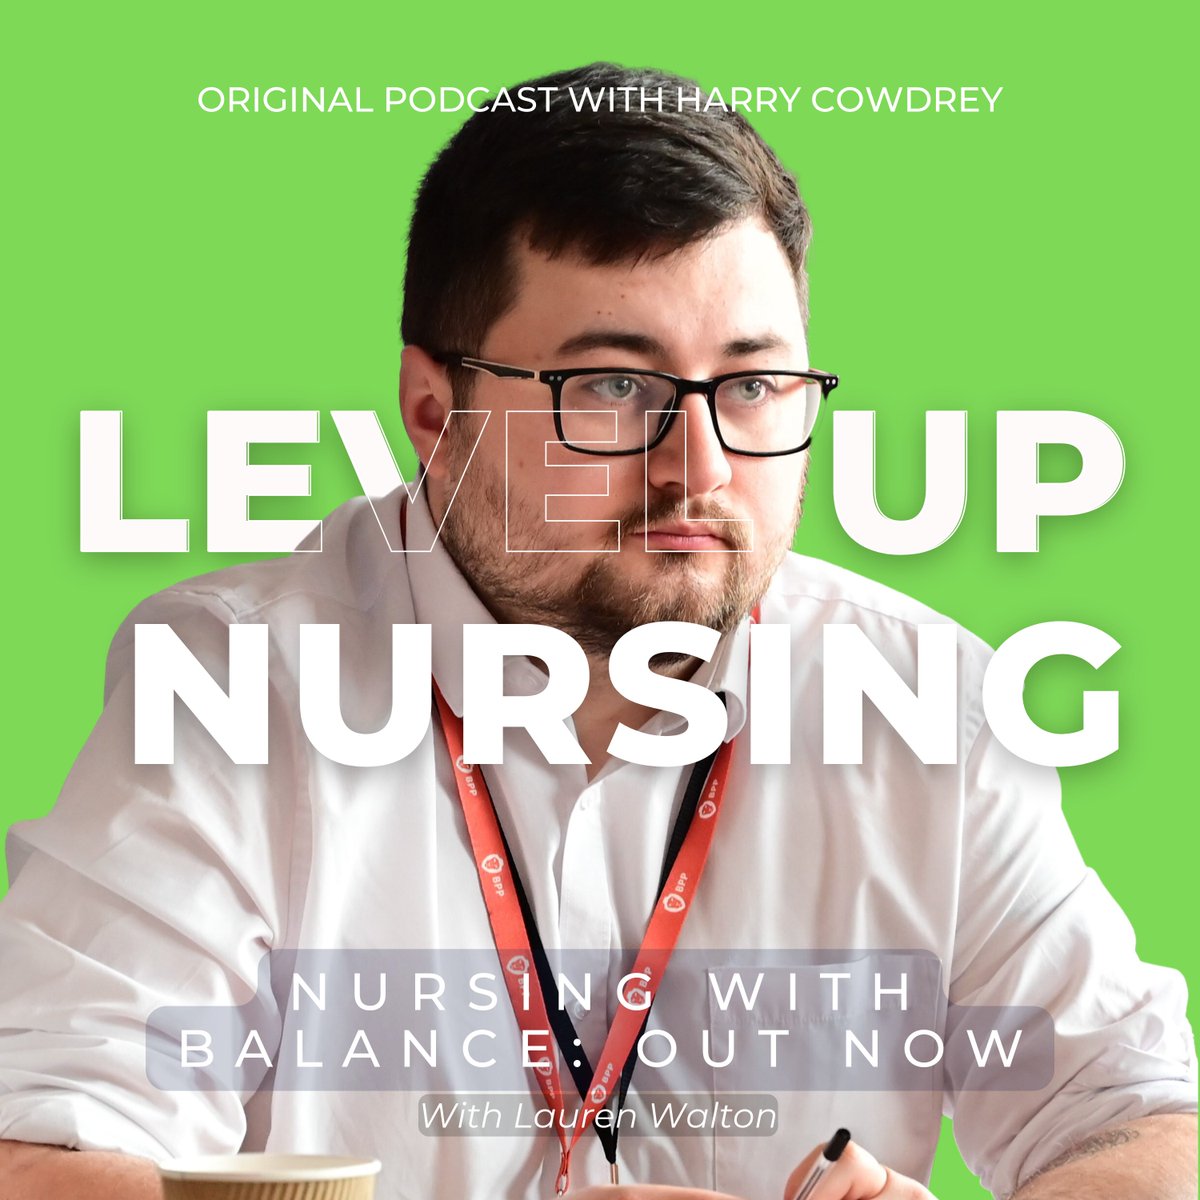 Check out Nursing School Student Voice Rep Harry Cowdrey’s new podcast Level Up Nursing. He debuts his first episode: Nursing with Balance with fellow student Lauren Walton. Take a listen today! lnkd.in/eHgVBYGN lnkd.in/eShVT-w9